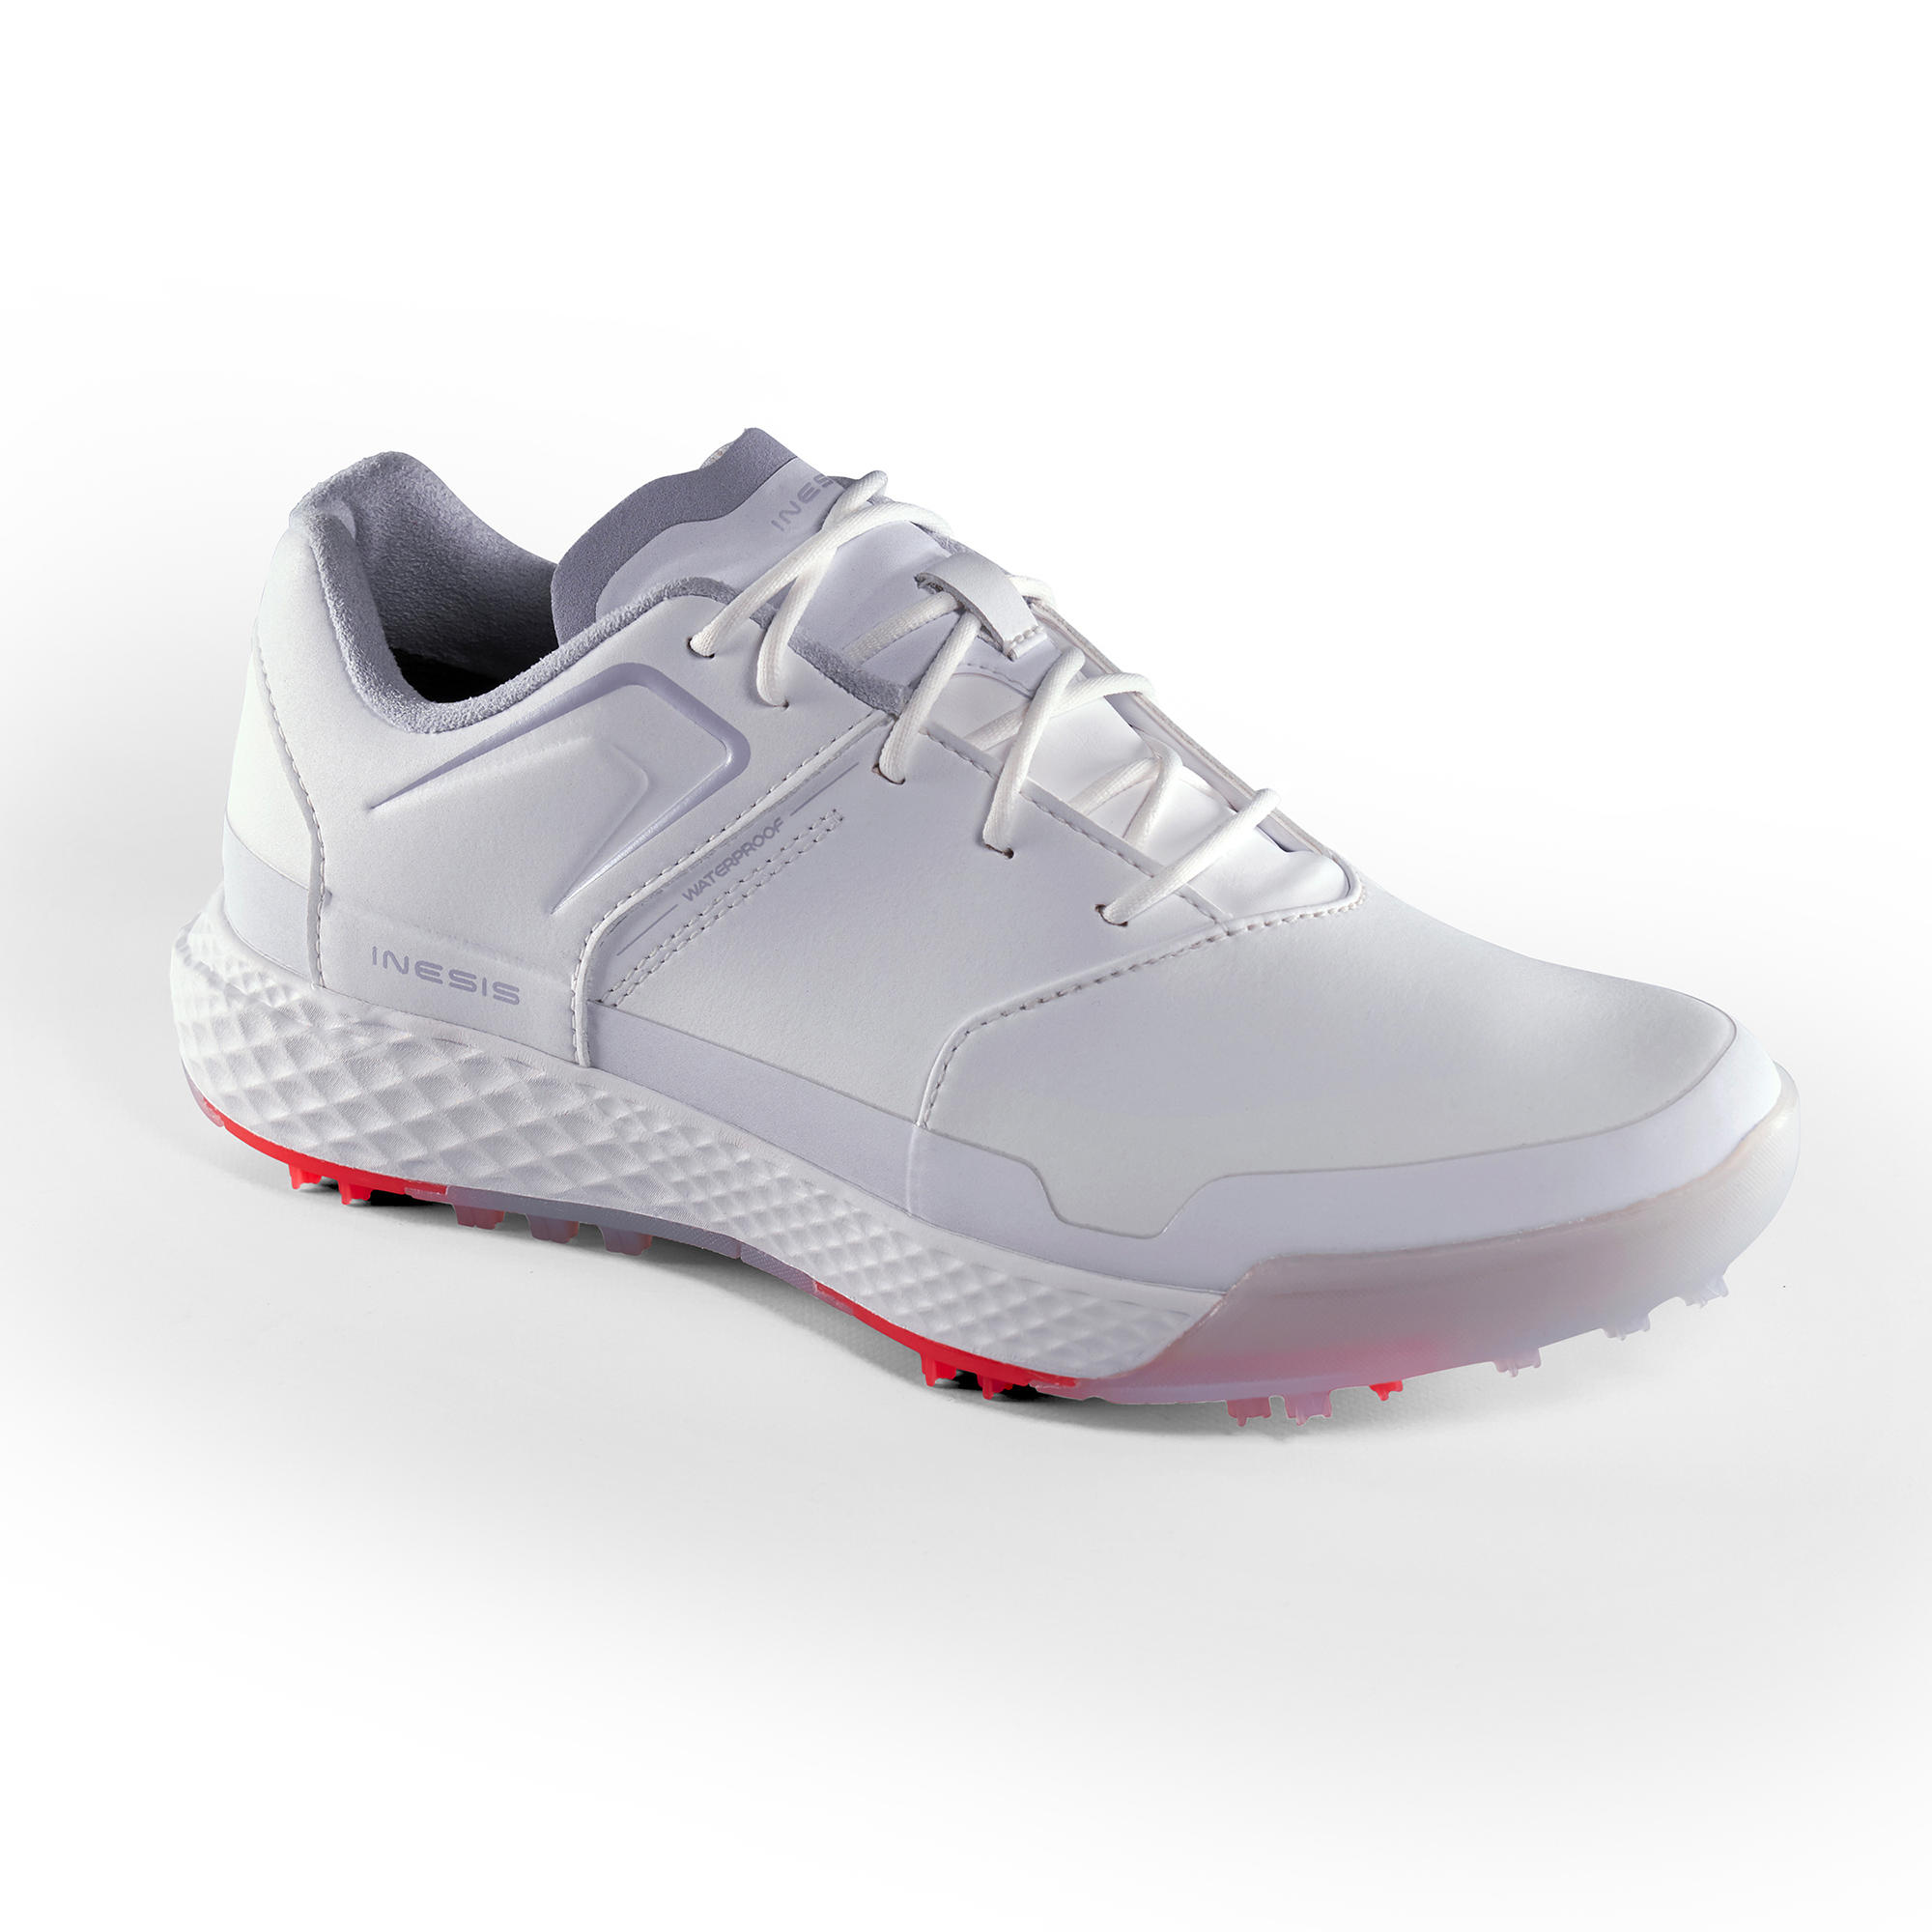 Are white golf shoes waterproof?